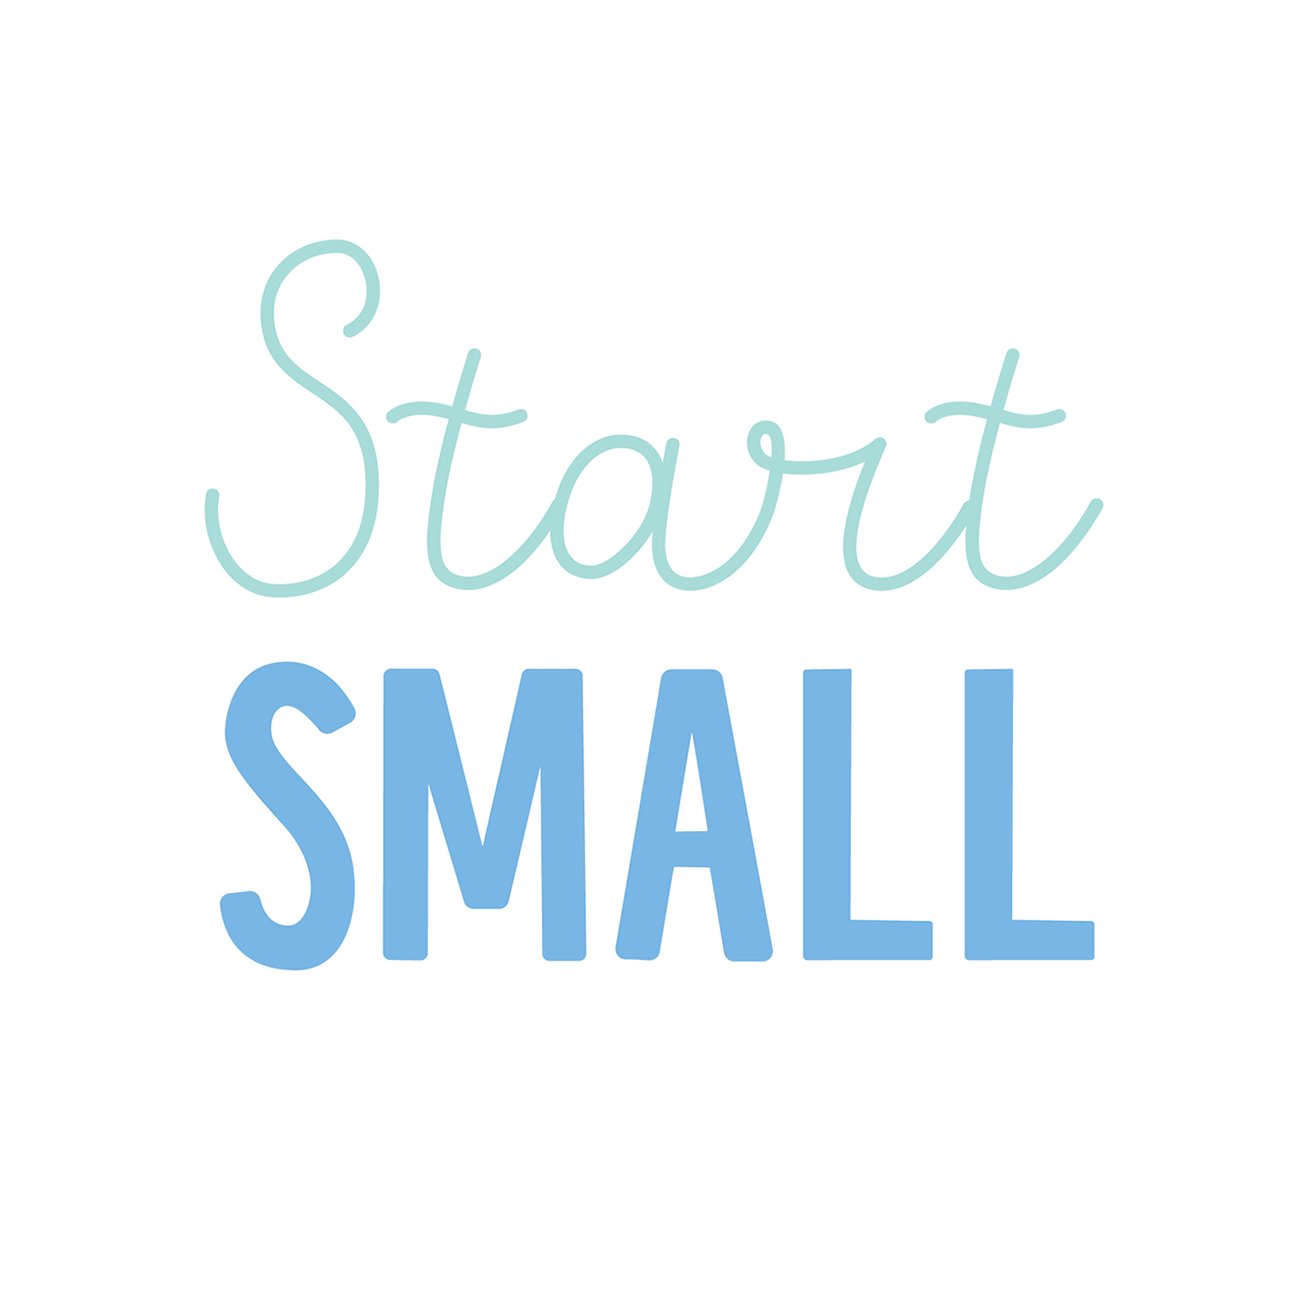 Start Small, Part 2: Small Risk